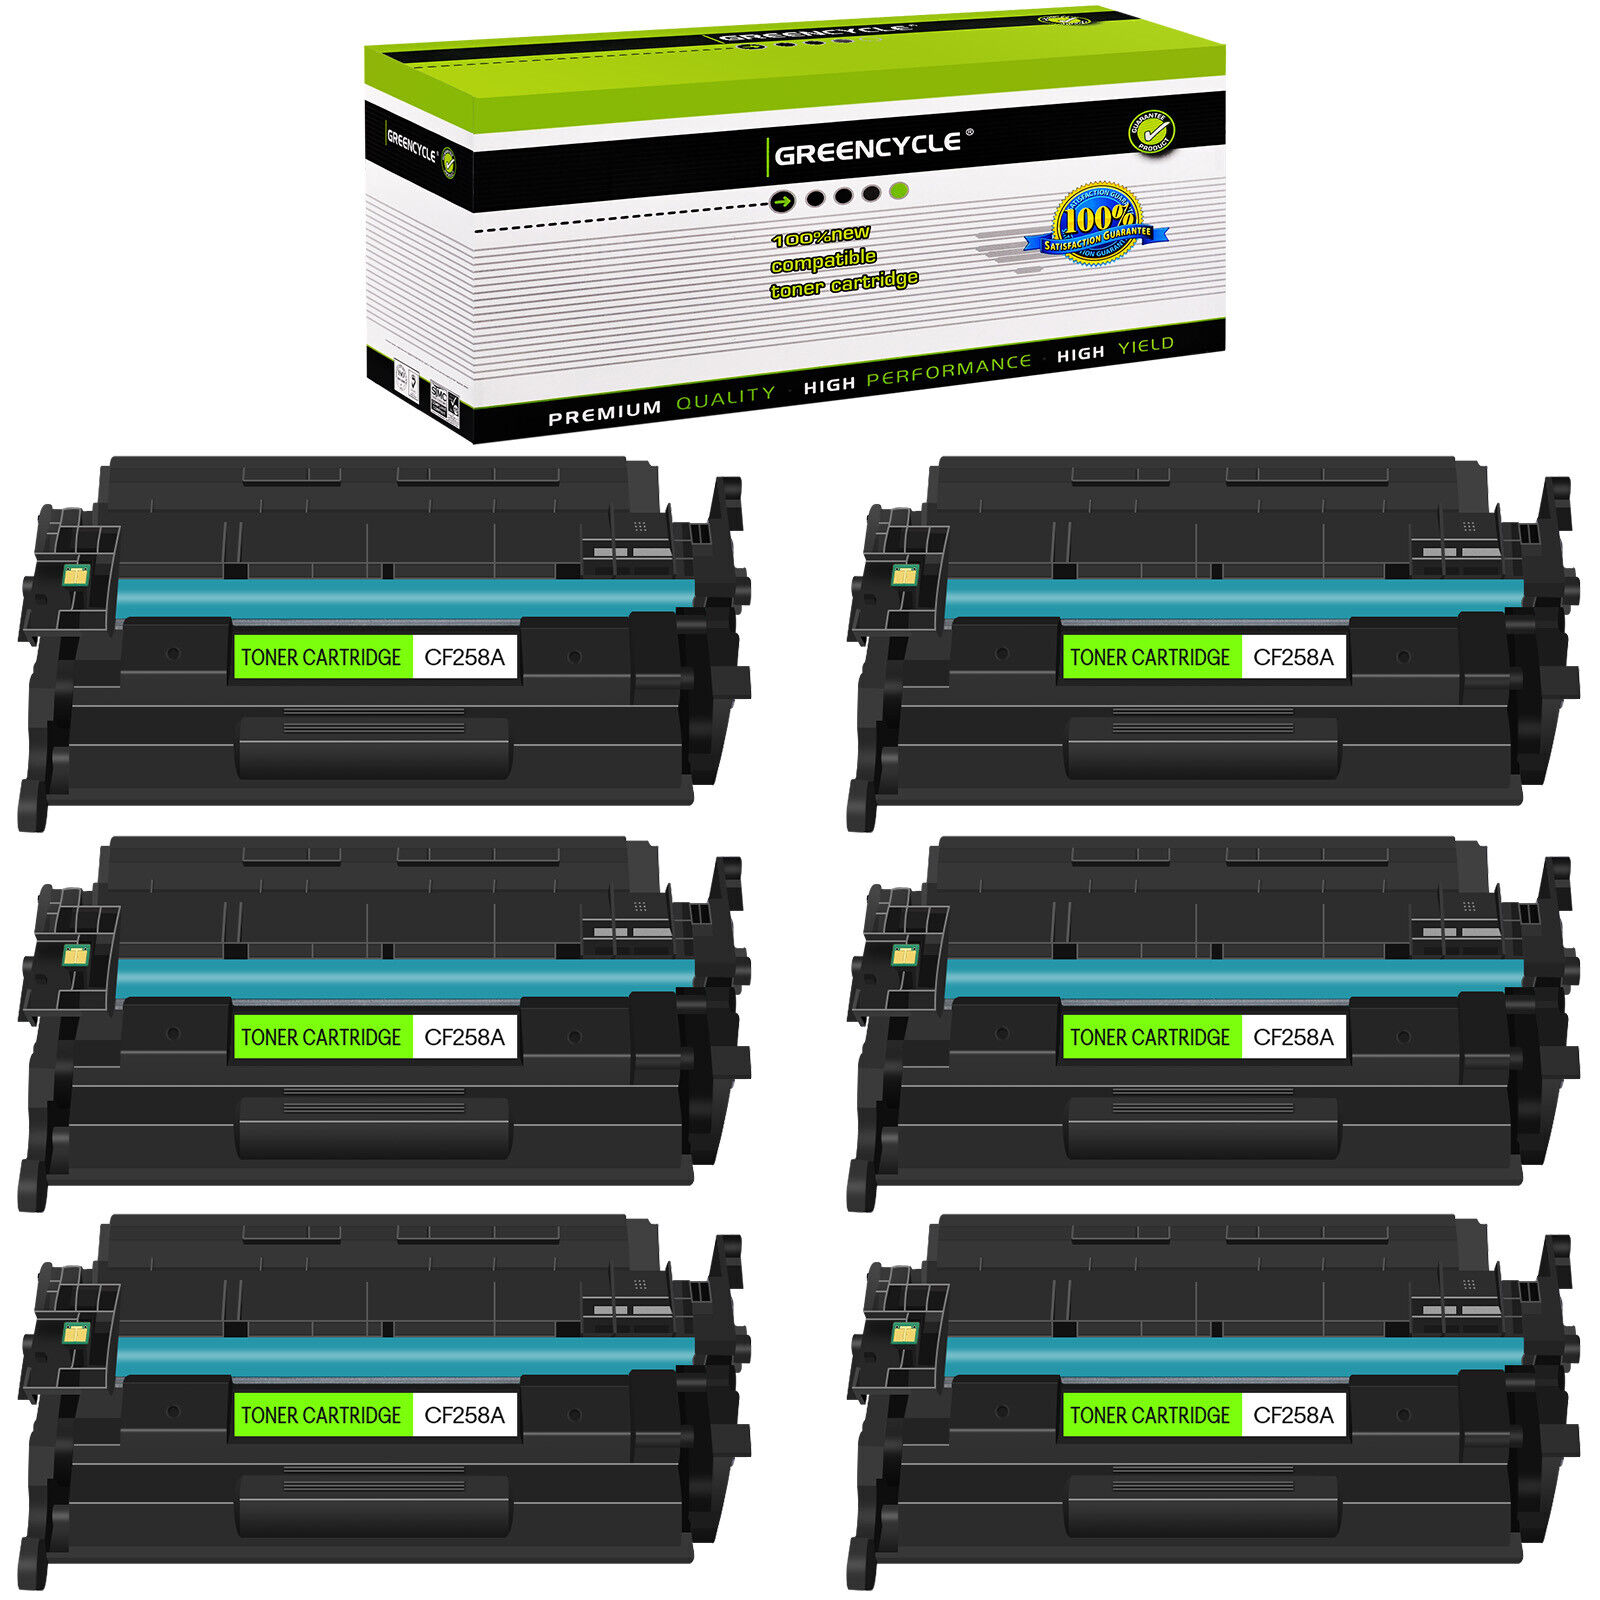 Greencycle 6PK CF258A with Chip Toner Cartridge for HP LaserJet Pro M404n M404dw